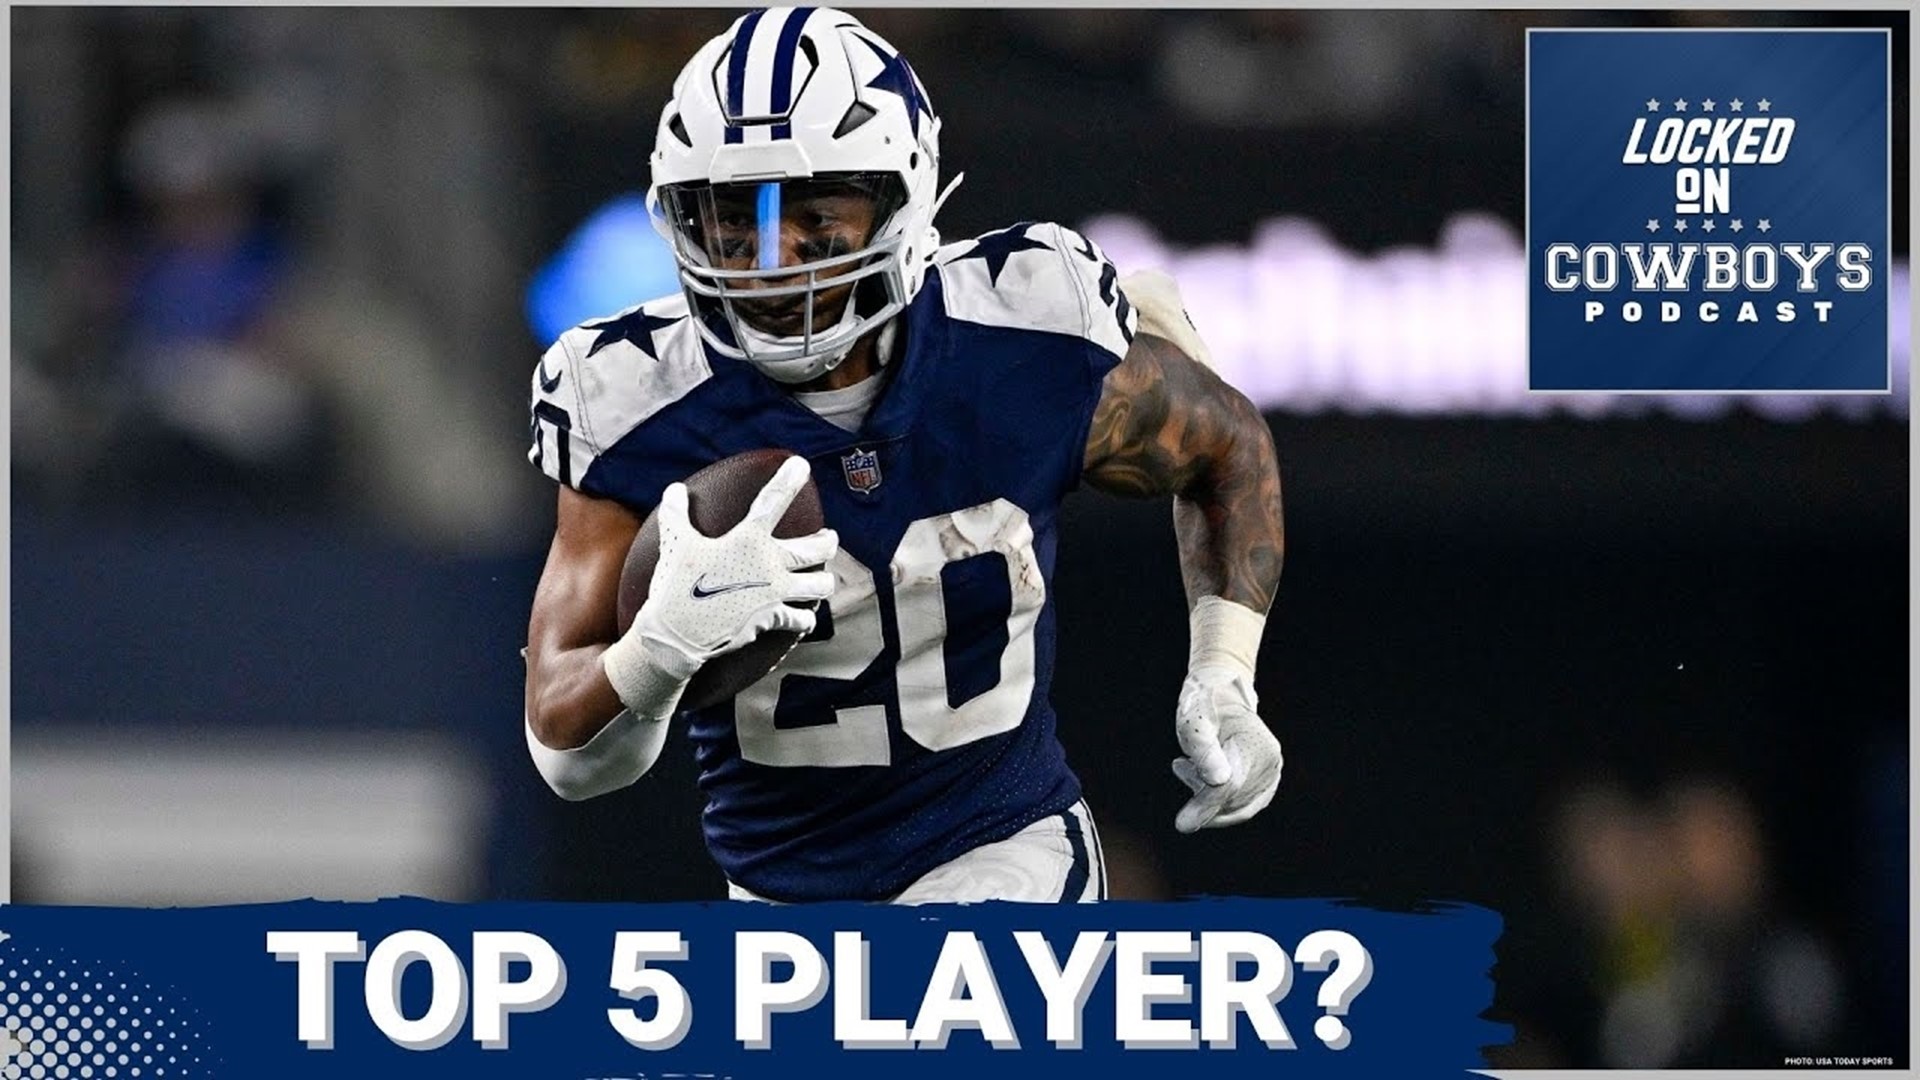 Marcus Mosher and Landon McCool rank the top five offensive players for the Dallas Cowboys heading into the 2023 season.